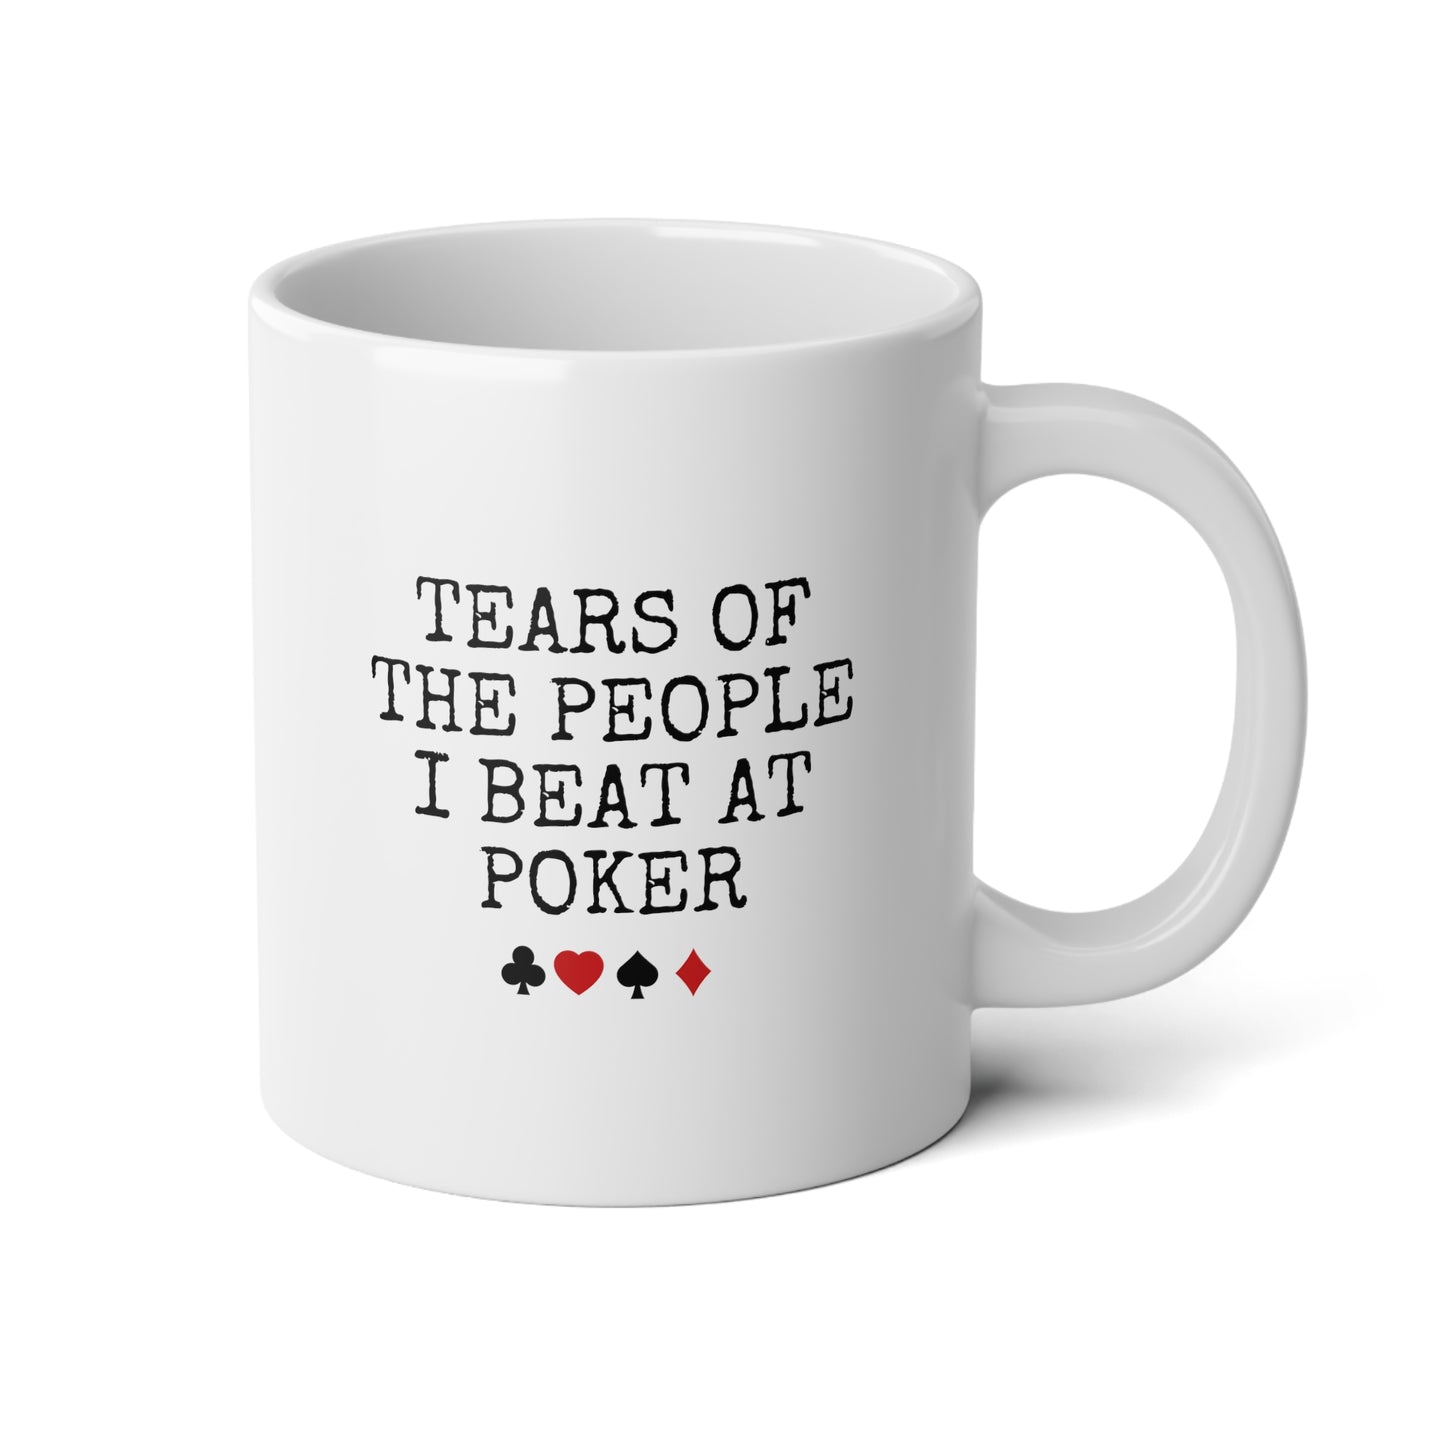 Tears Of The People I Beat At Poker 20oz white funny large coffee mug gift for poker lover cards player waveywares wavey wares wavywares wavy wares